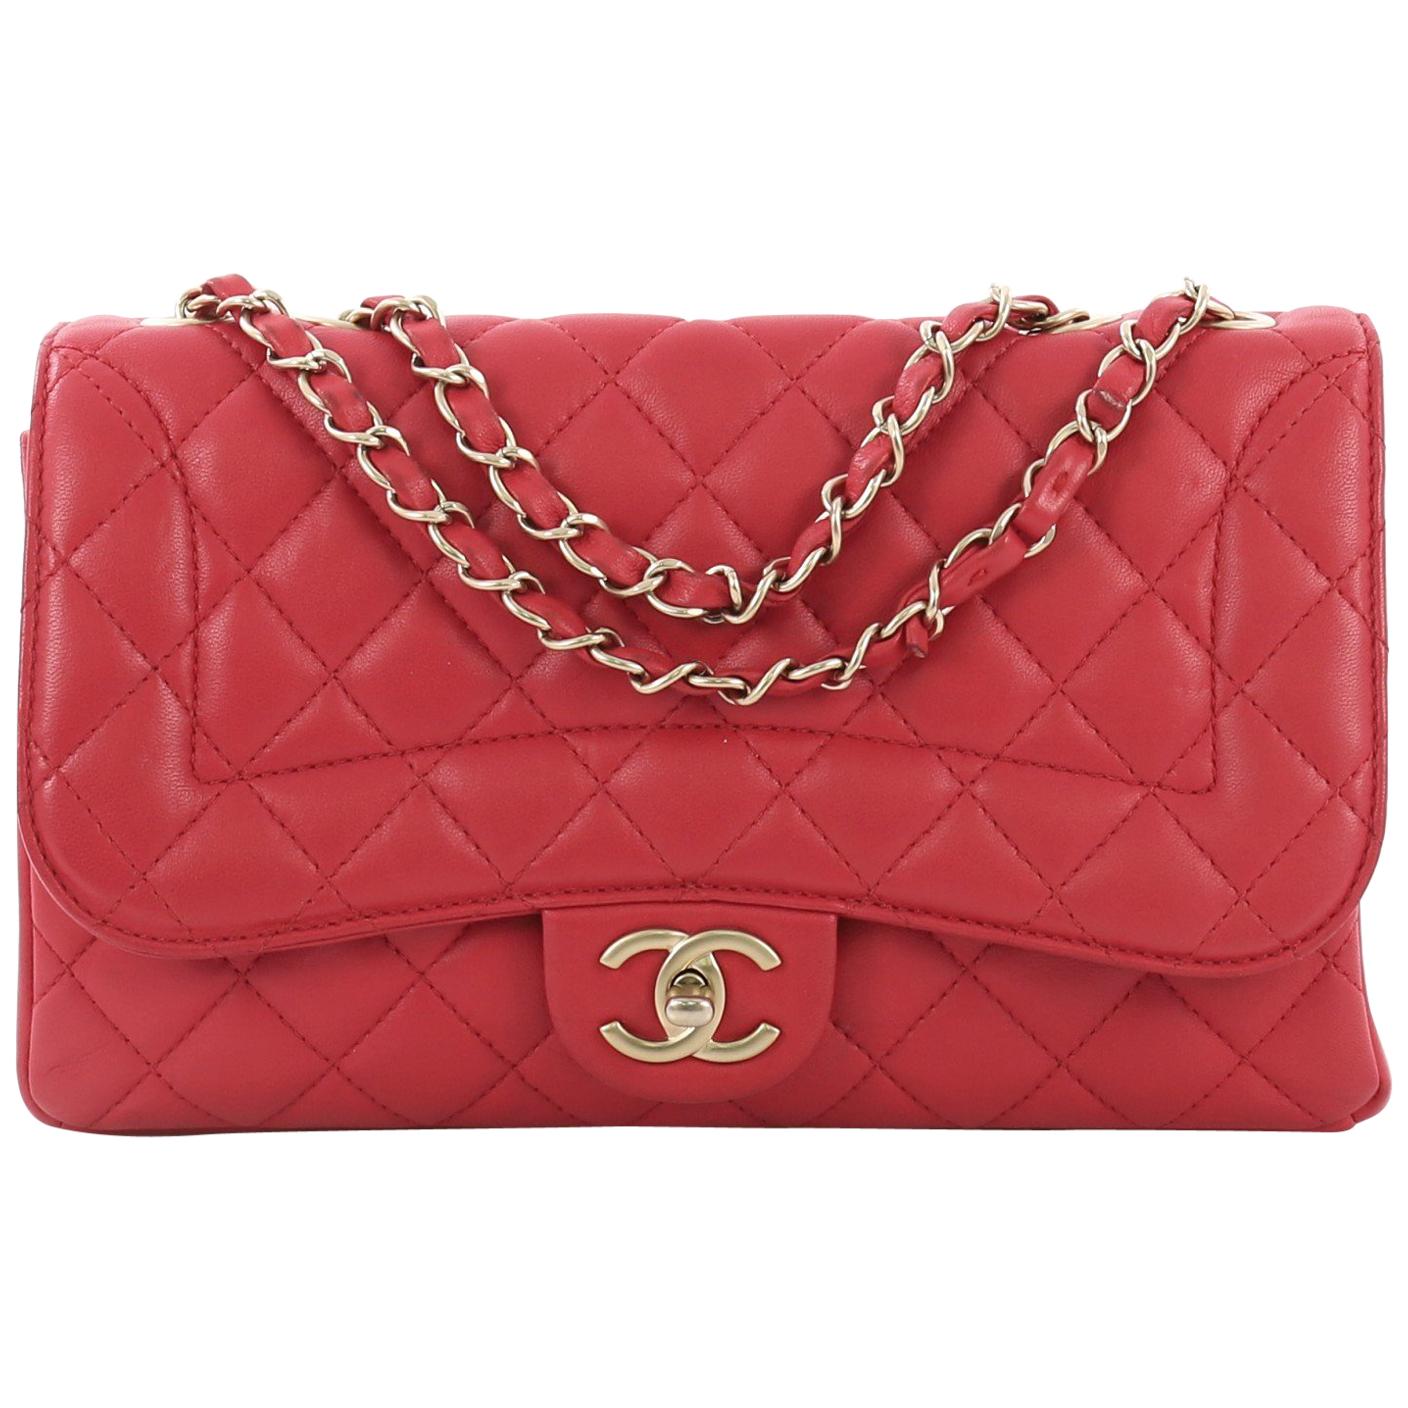 Splendid and Rare Chanel Mini Timeless Flap bag in red jersey